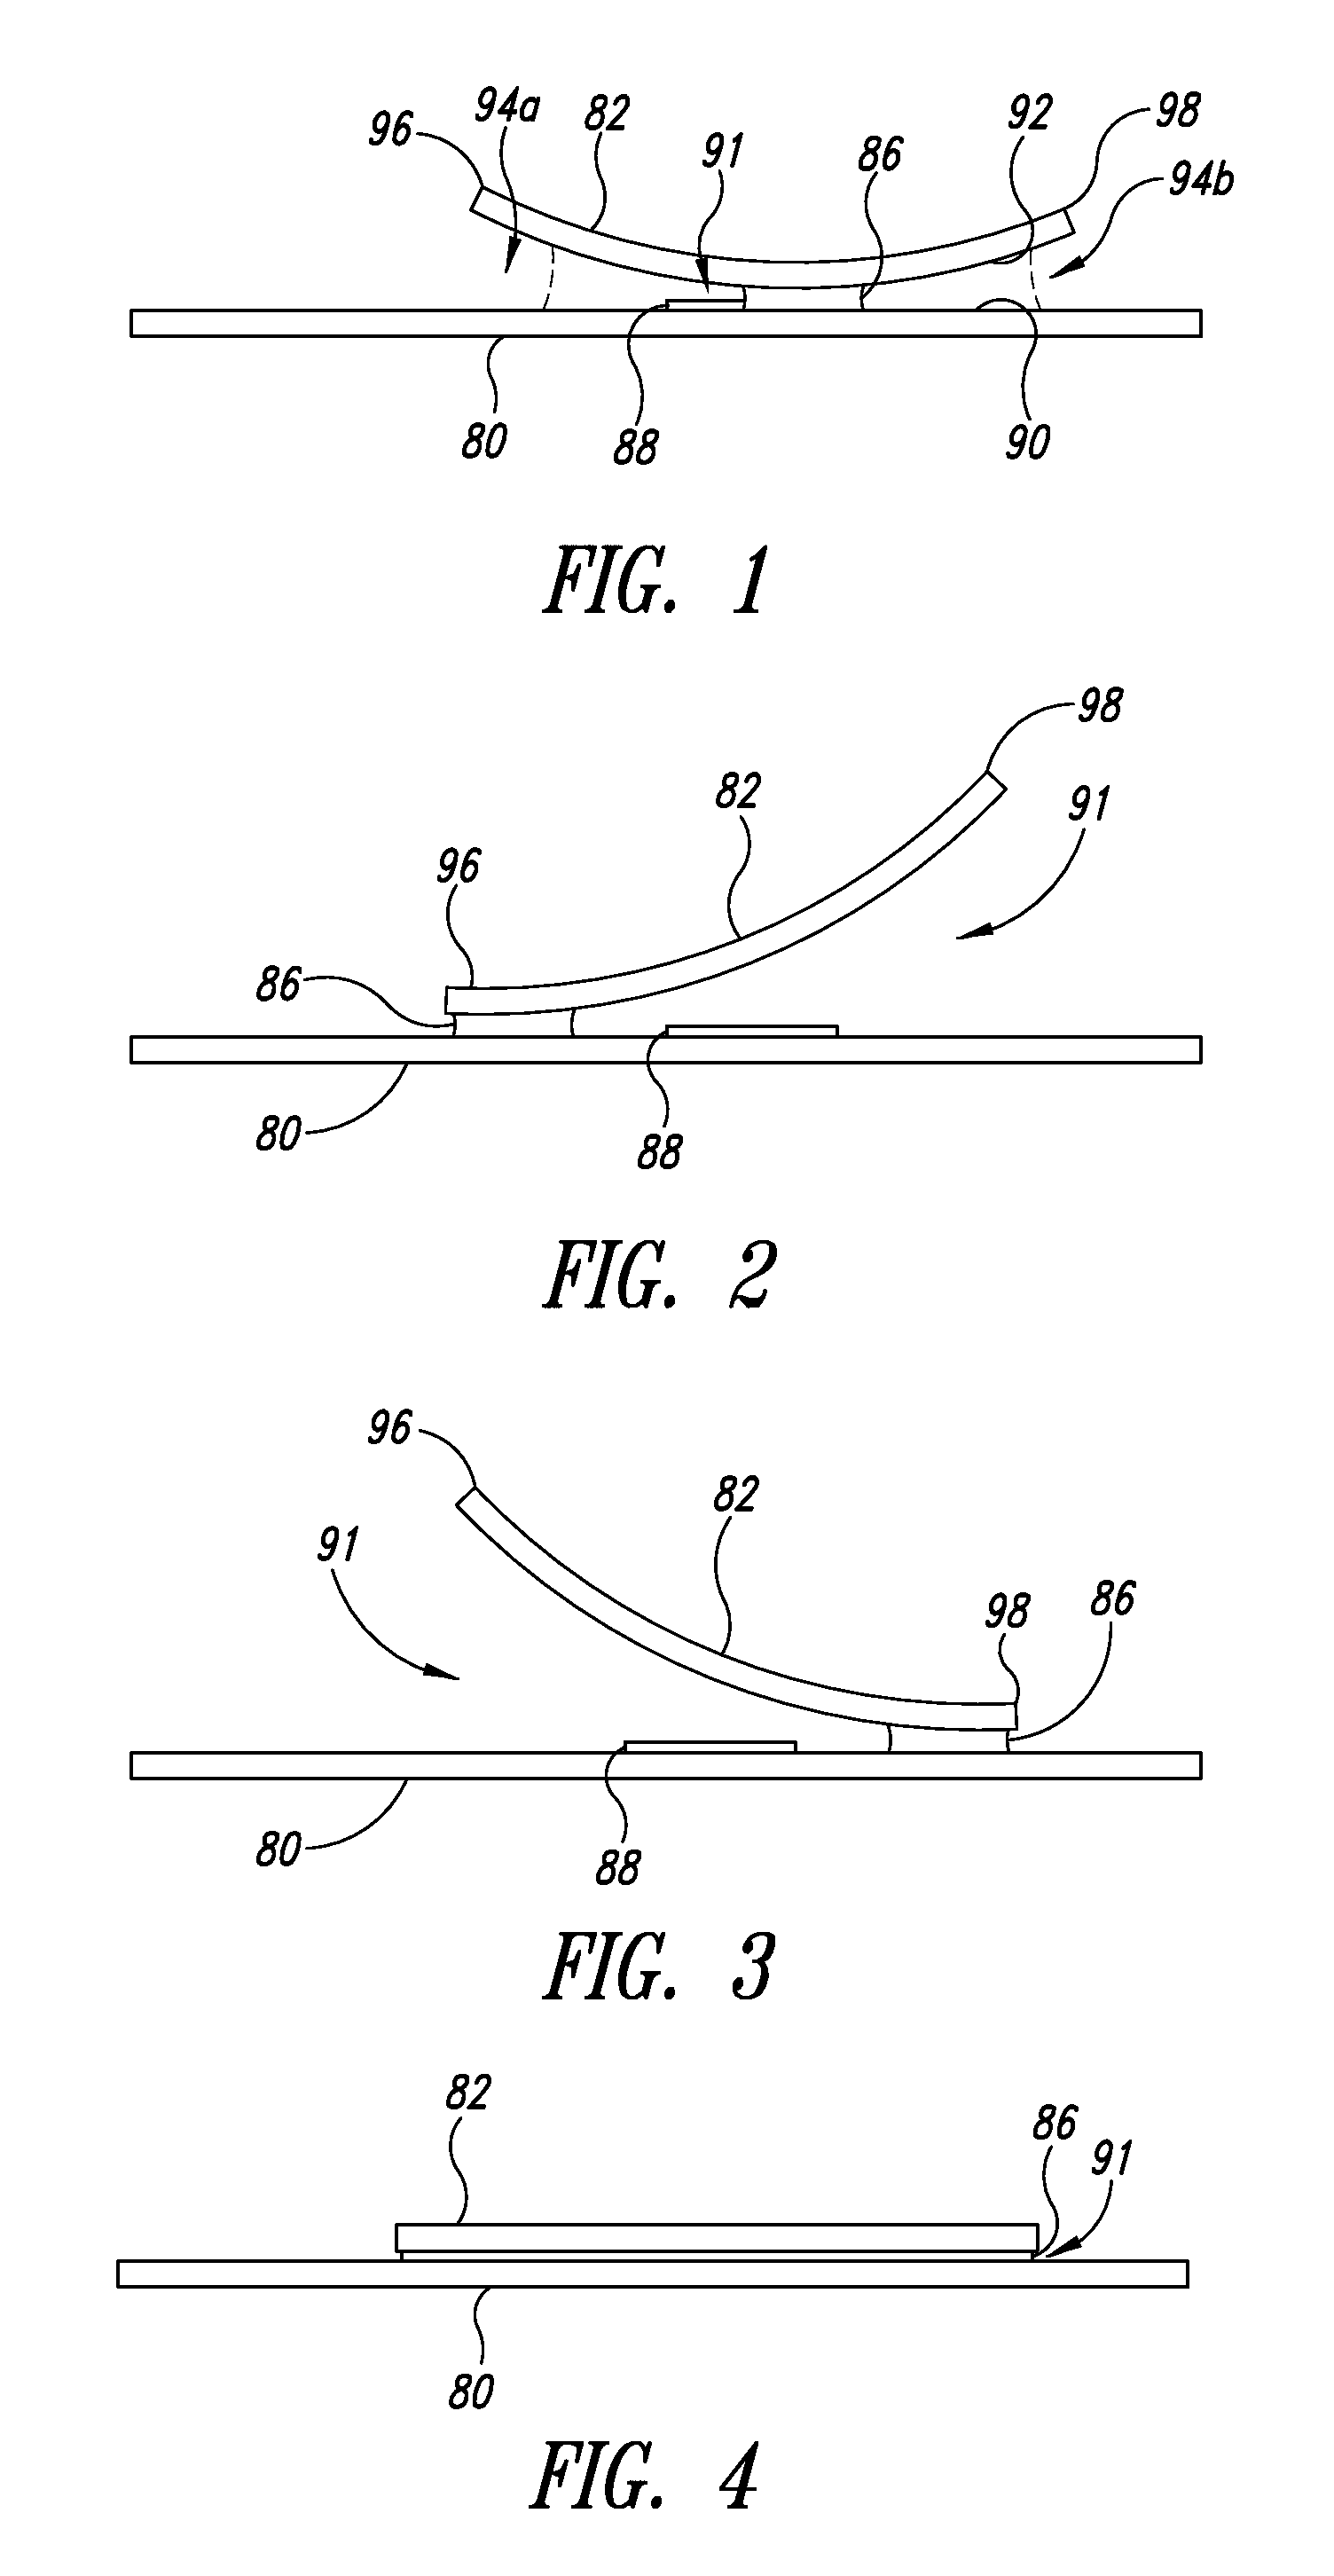 Thin film processing apparatuses for adjustable volume accommodation